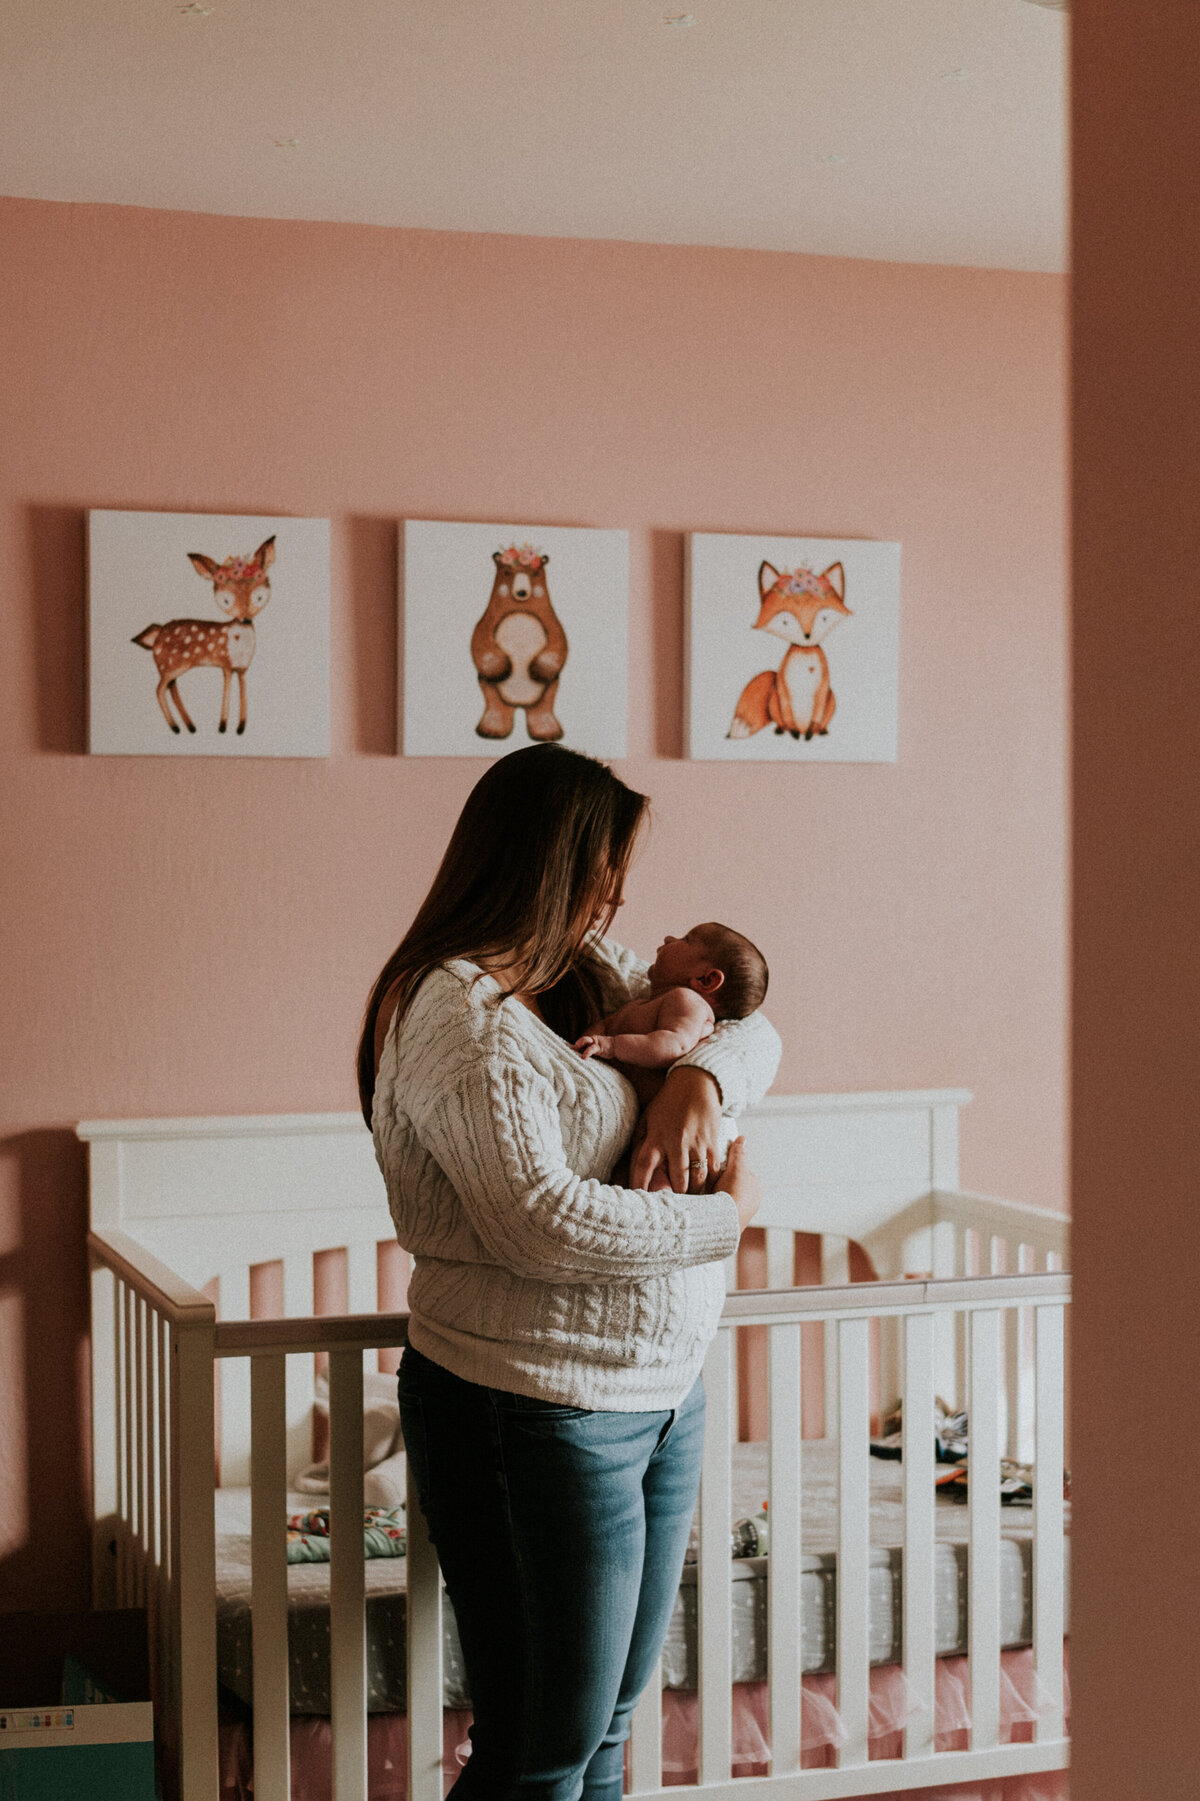 Witness your sleeping beauties with cozy newborn portraits in Minneapolis. Shannon Kathleen Photography captures the serenity of your newborn in the comfort of your home